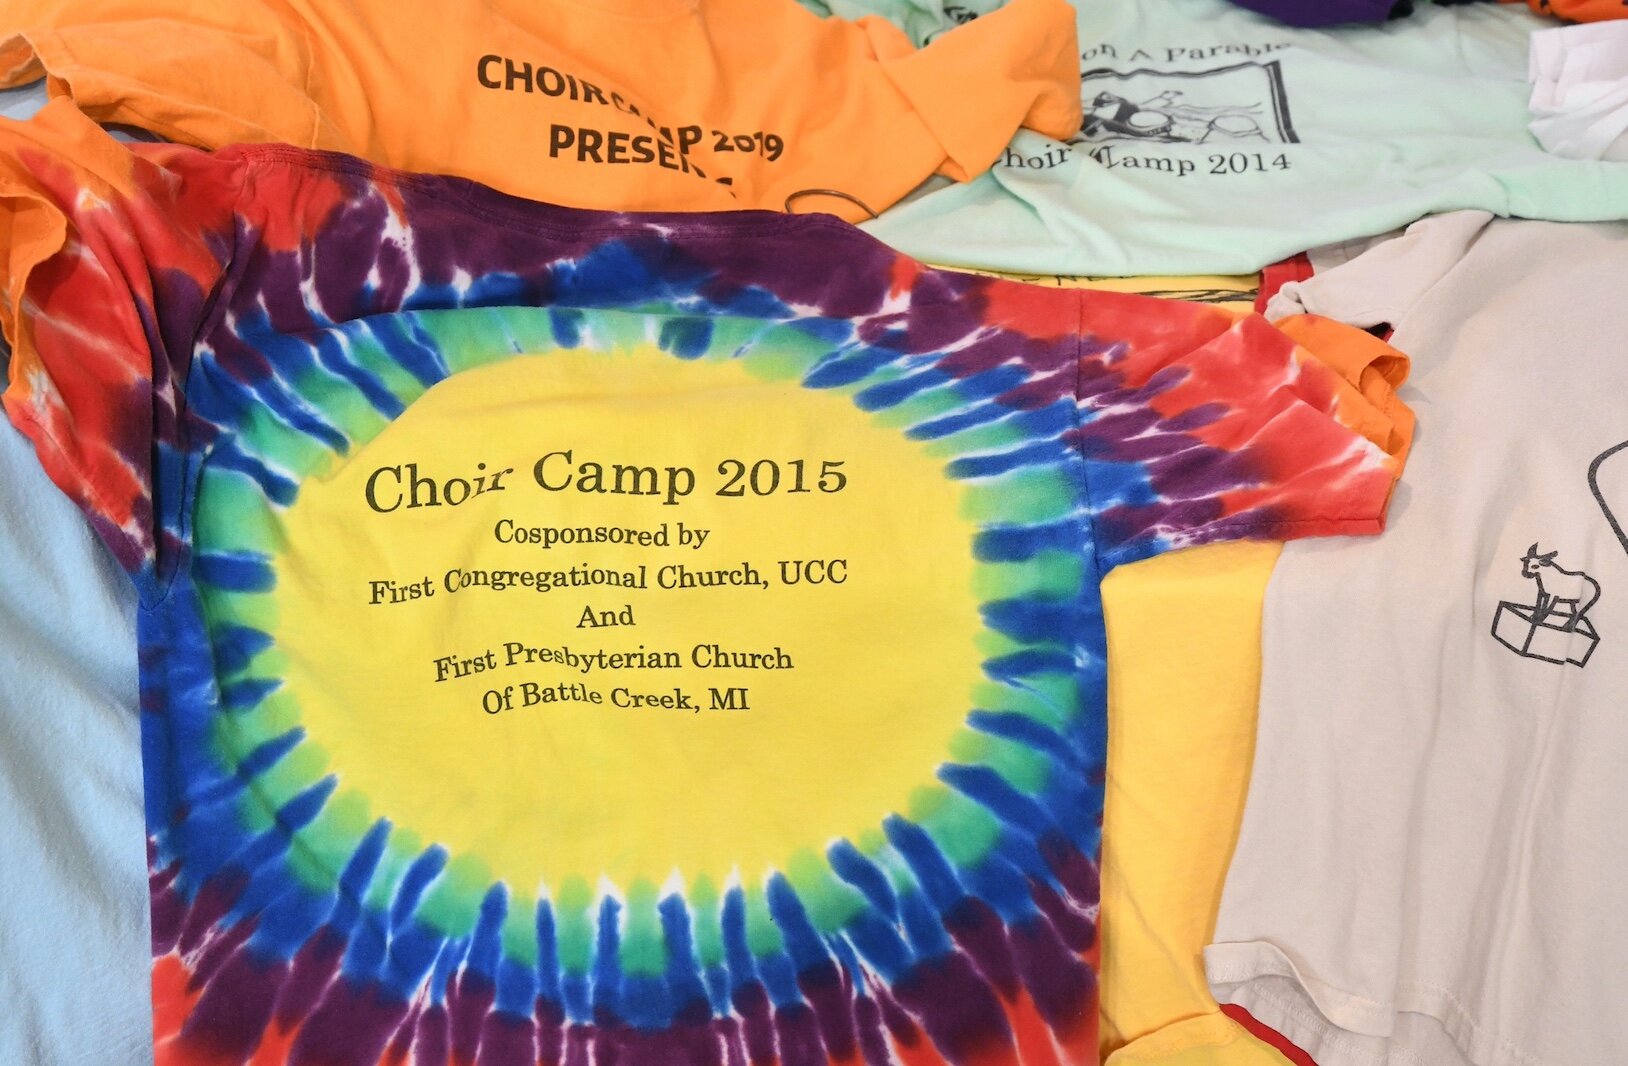 A small sampling of the T-shirts representing past choir camps.